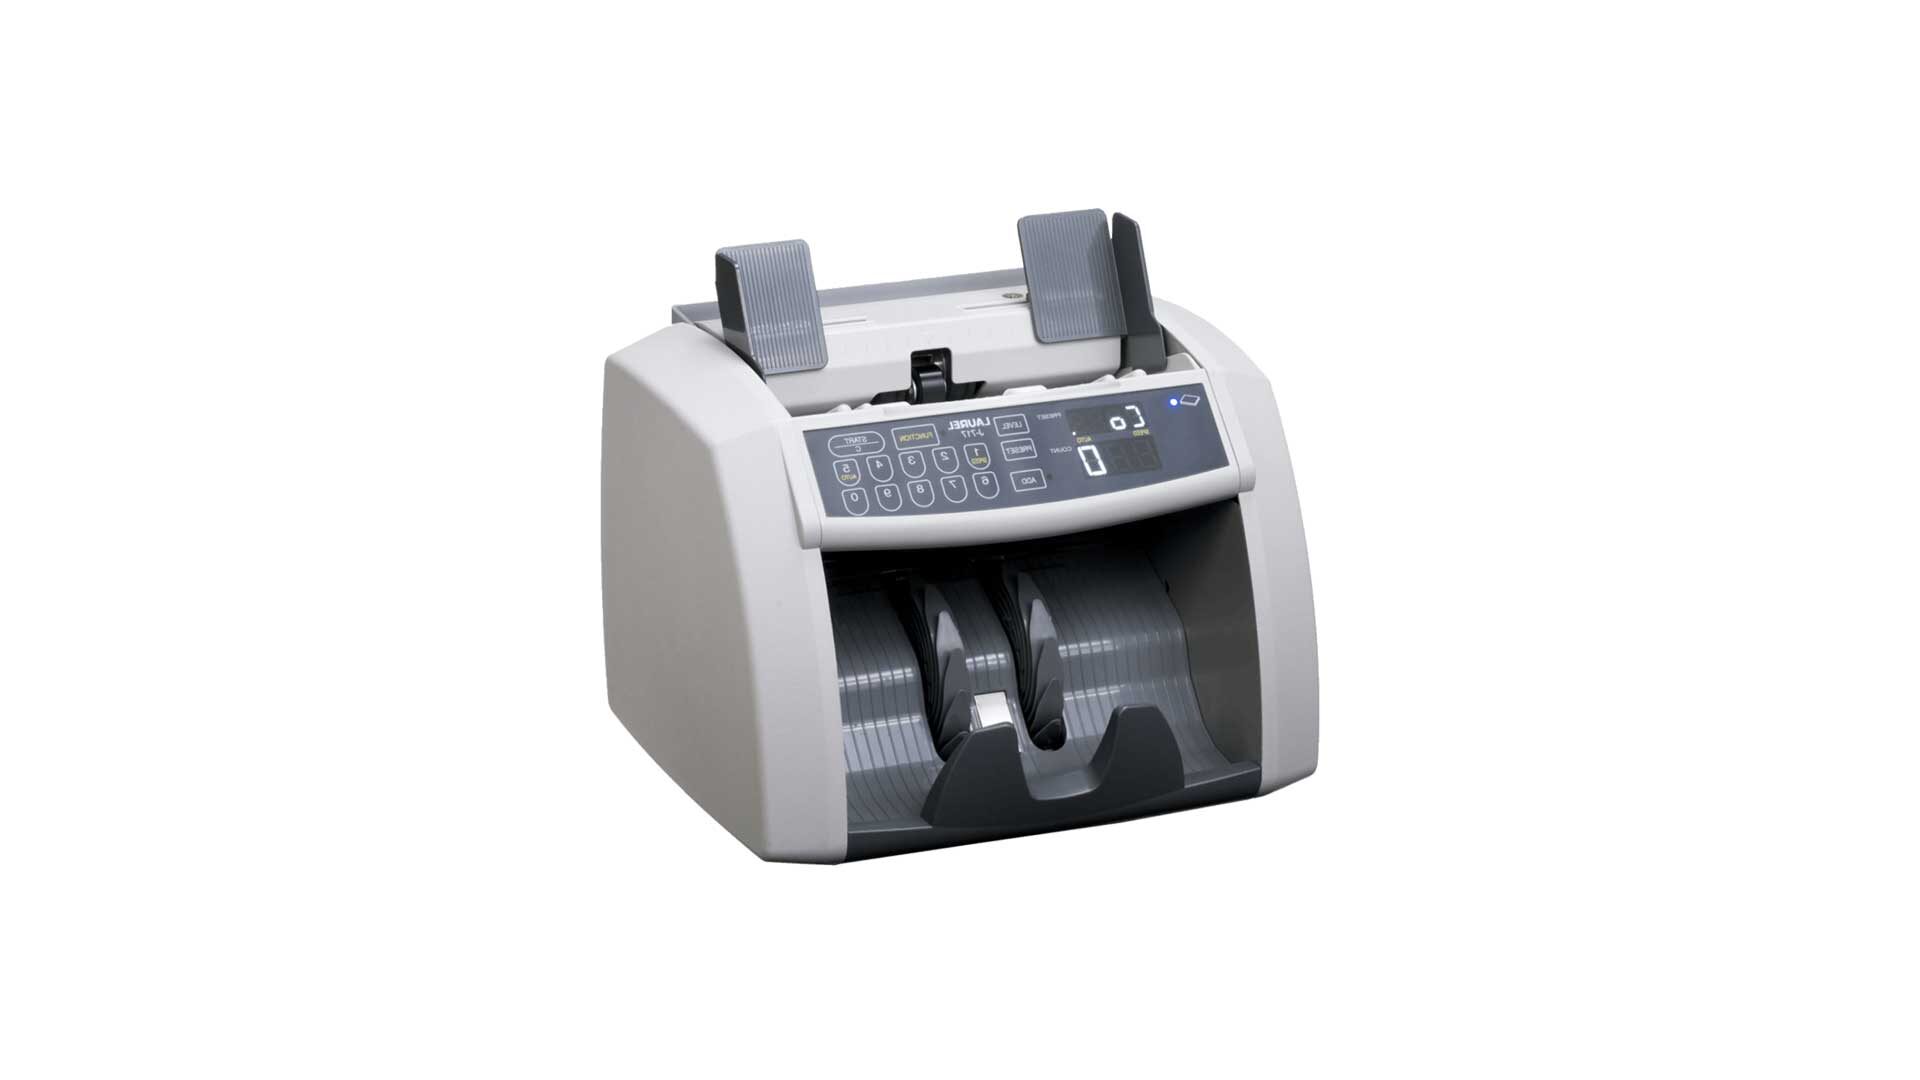 J717 Cash Recycler, Money Handling Machines and Security Solutions for Financial Institutions